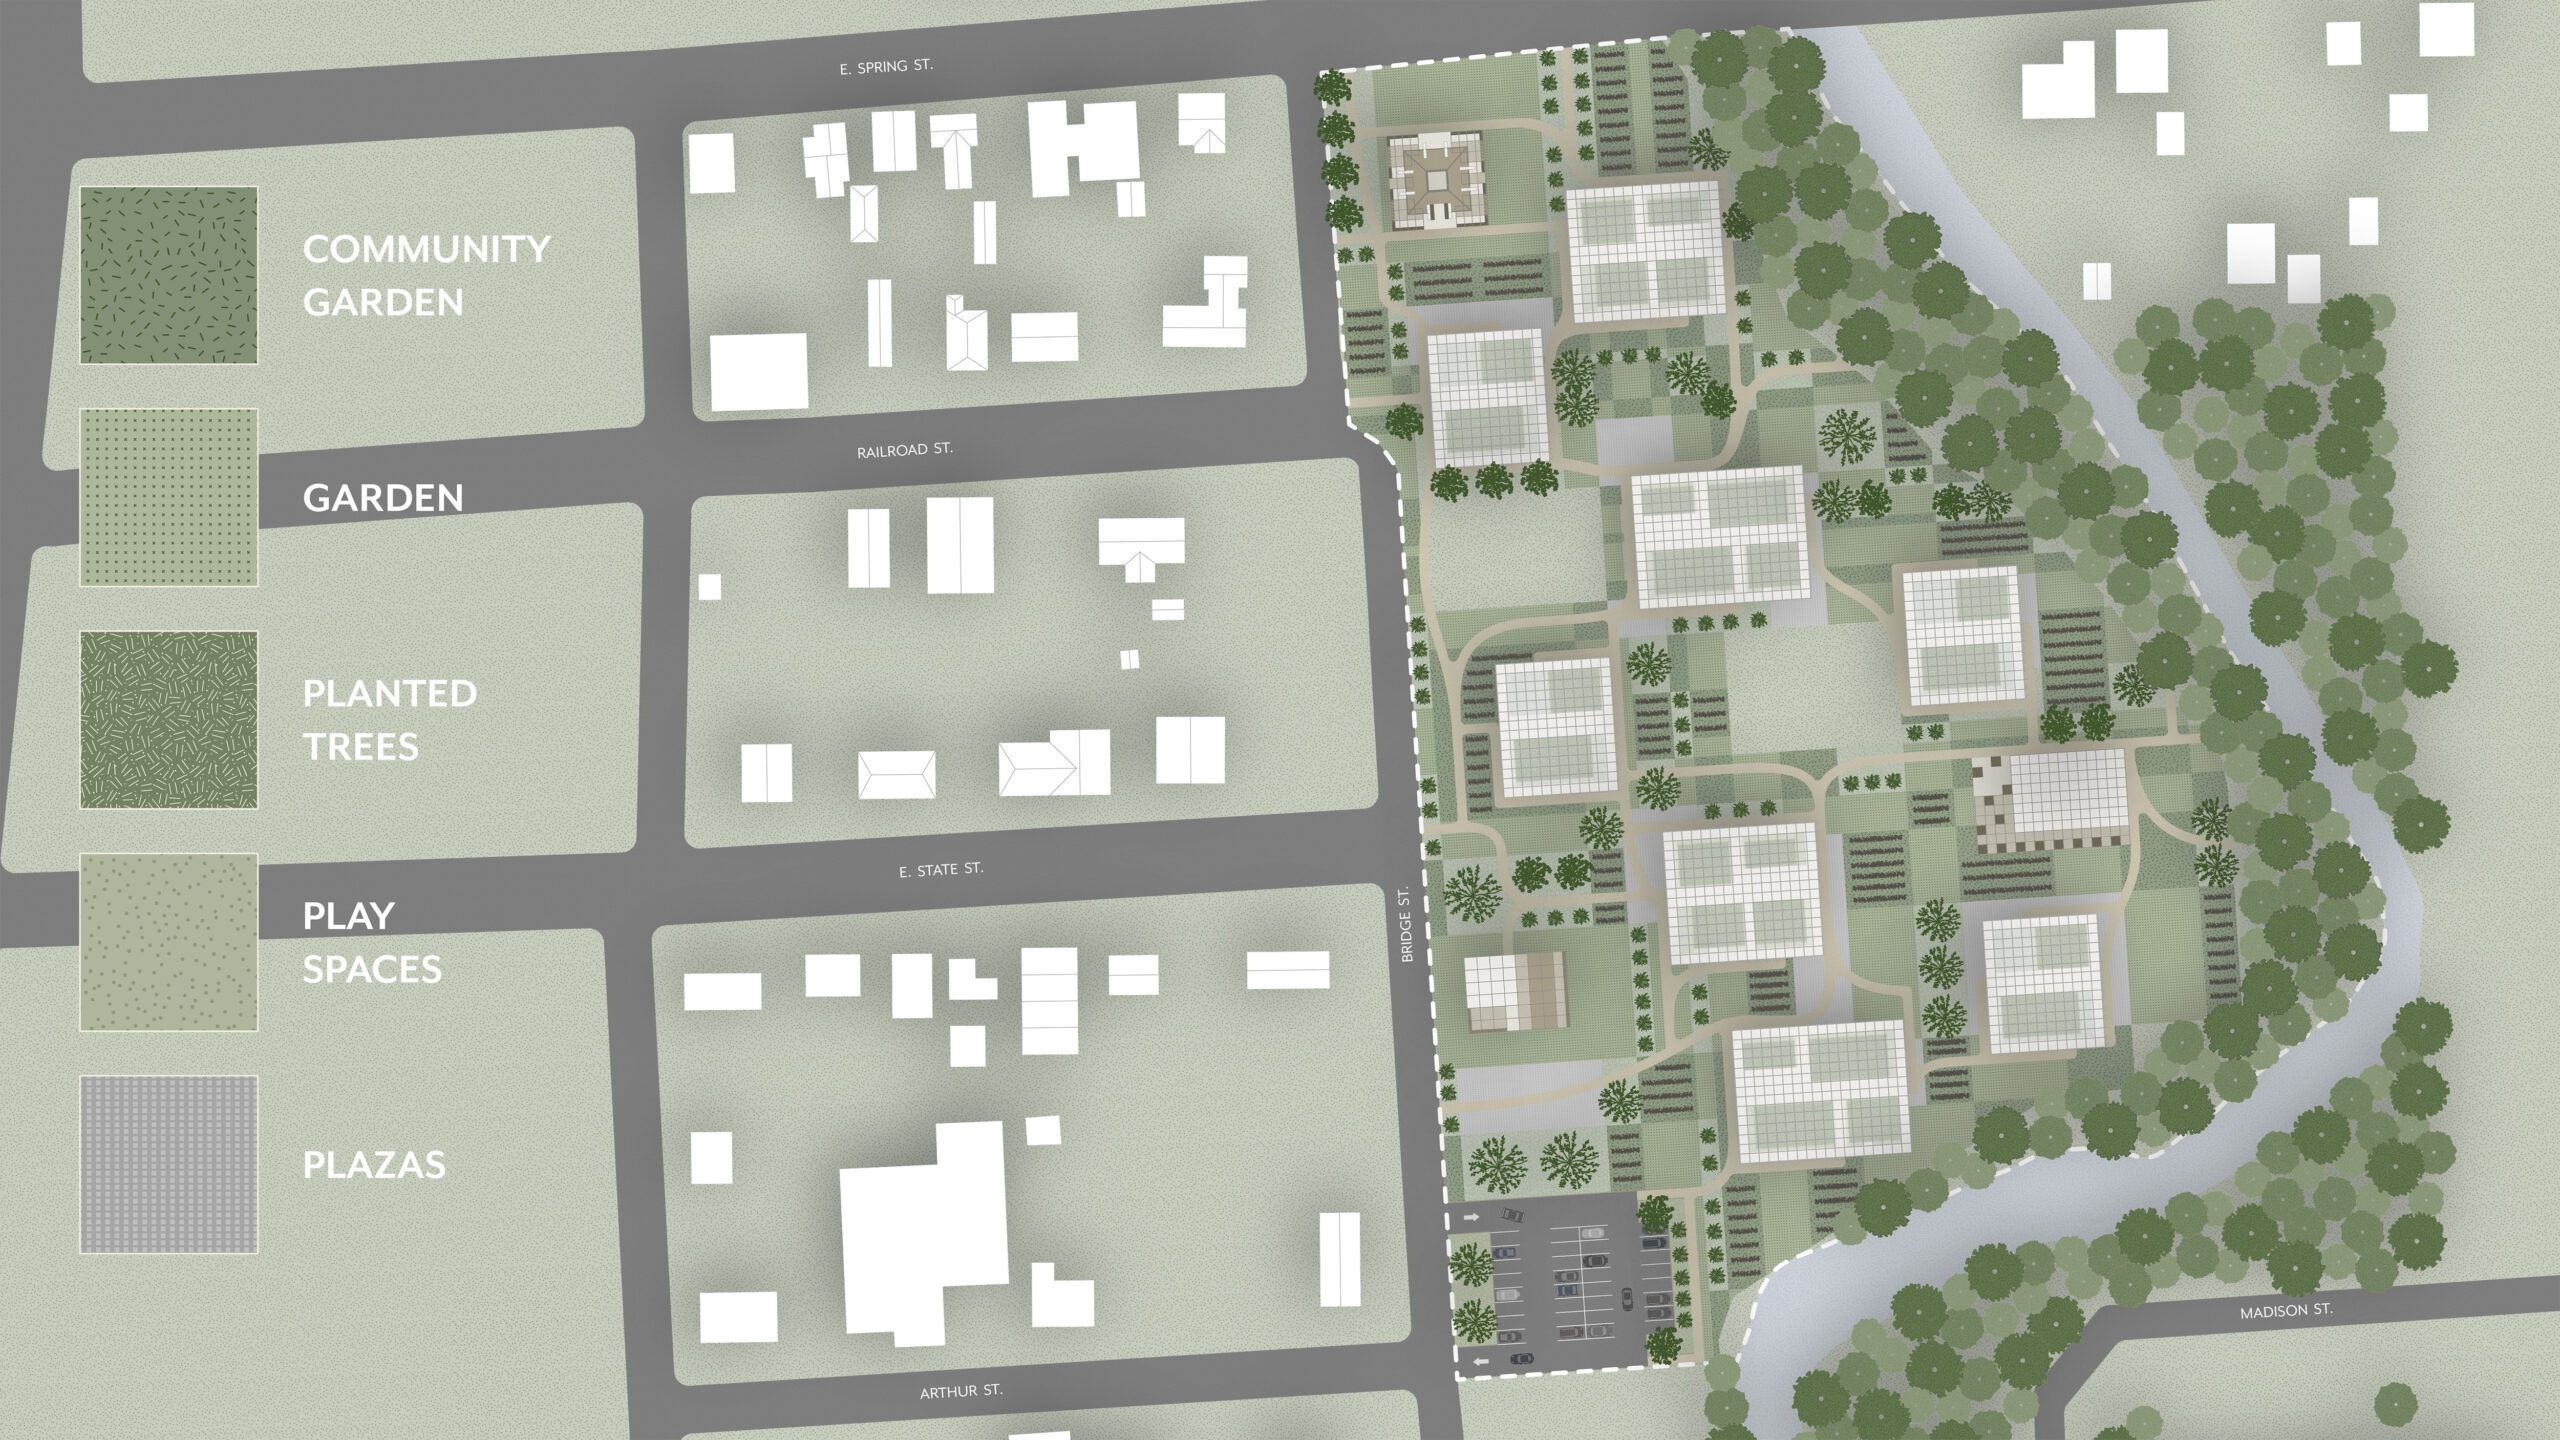 Site plan of architecture project